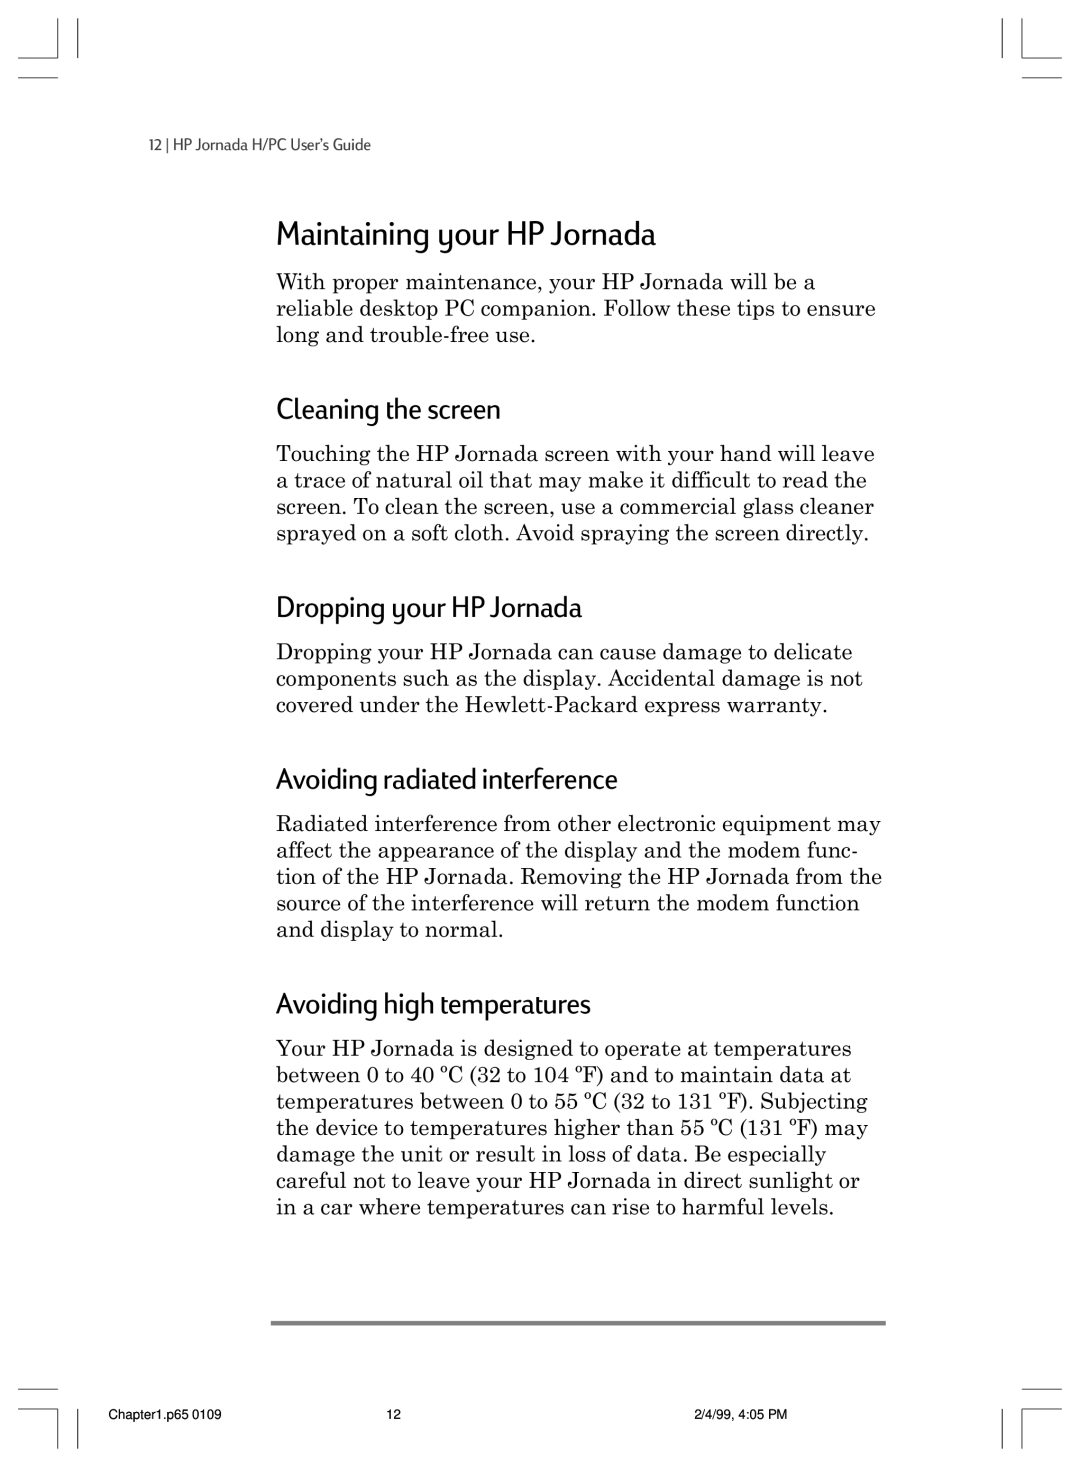 HP 820 E manual Maintaining your HP Jornada, Cleaning the screen, Dropping your HP Jornada, Avoiding radiated interference 